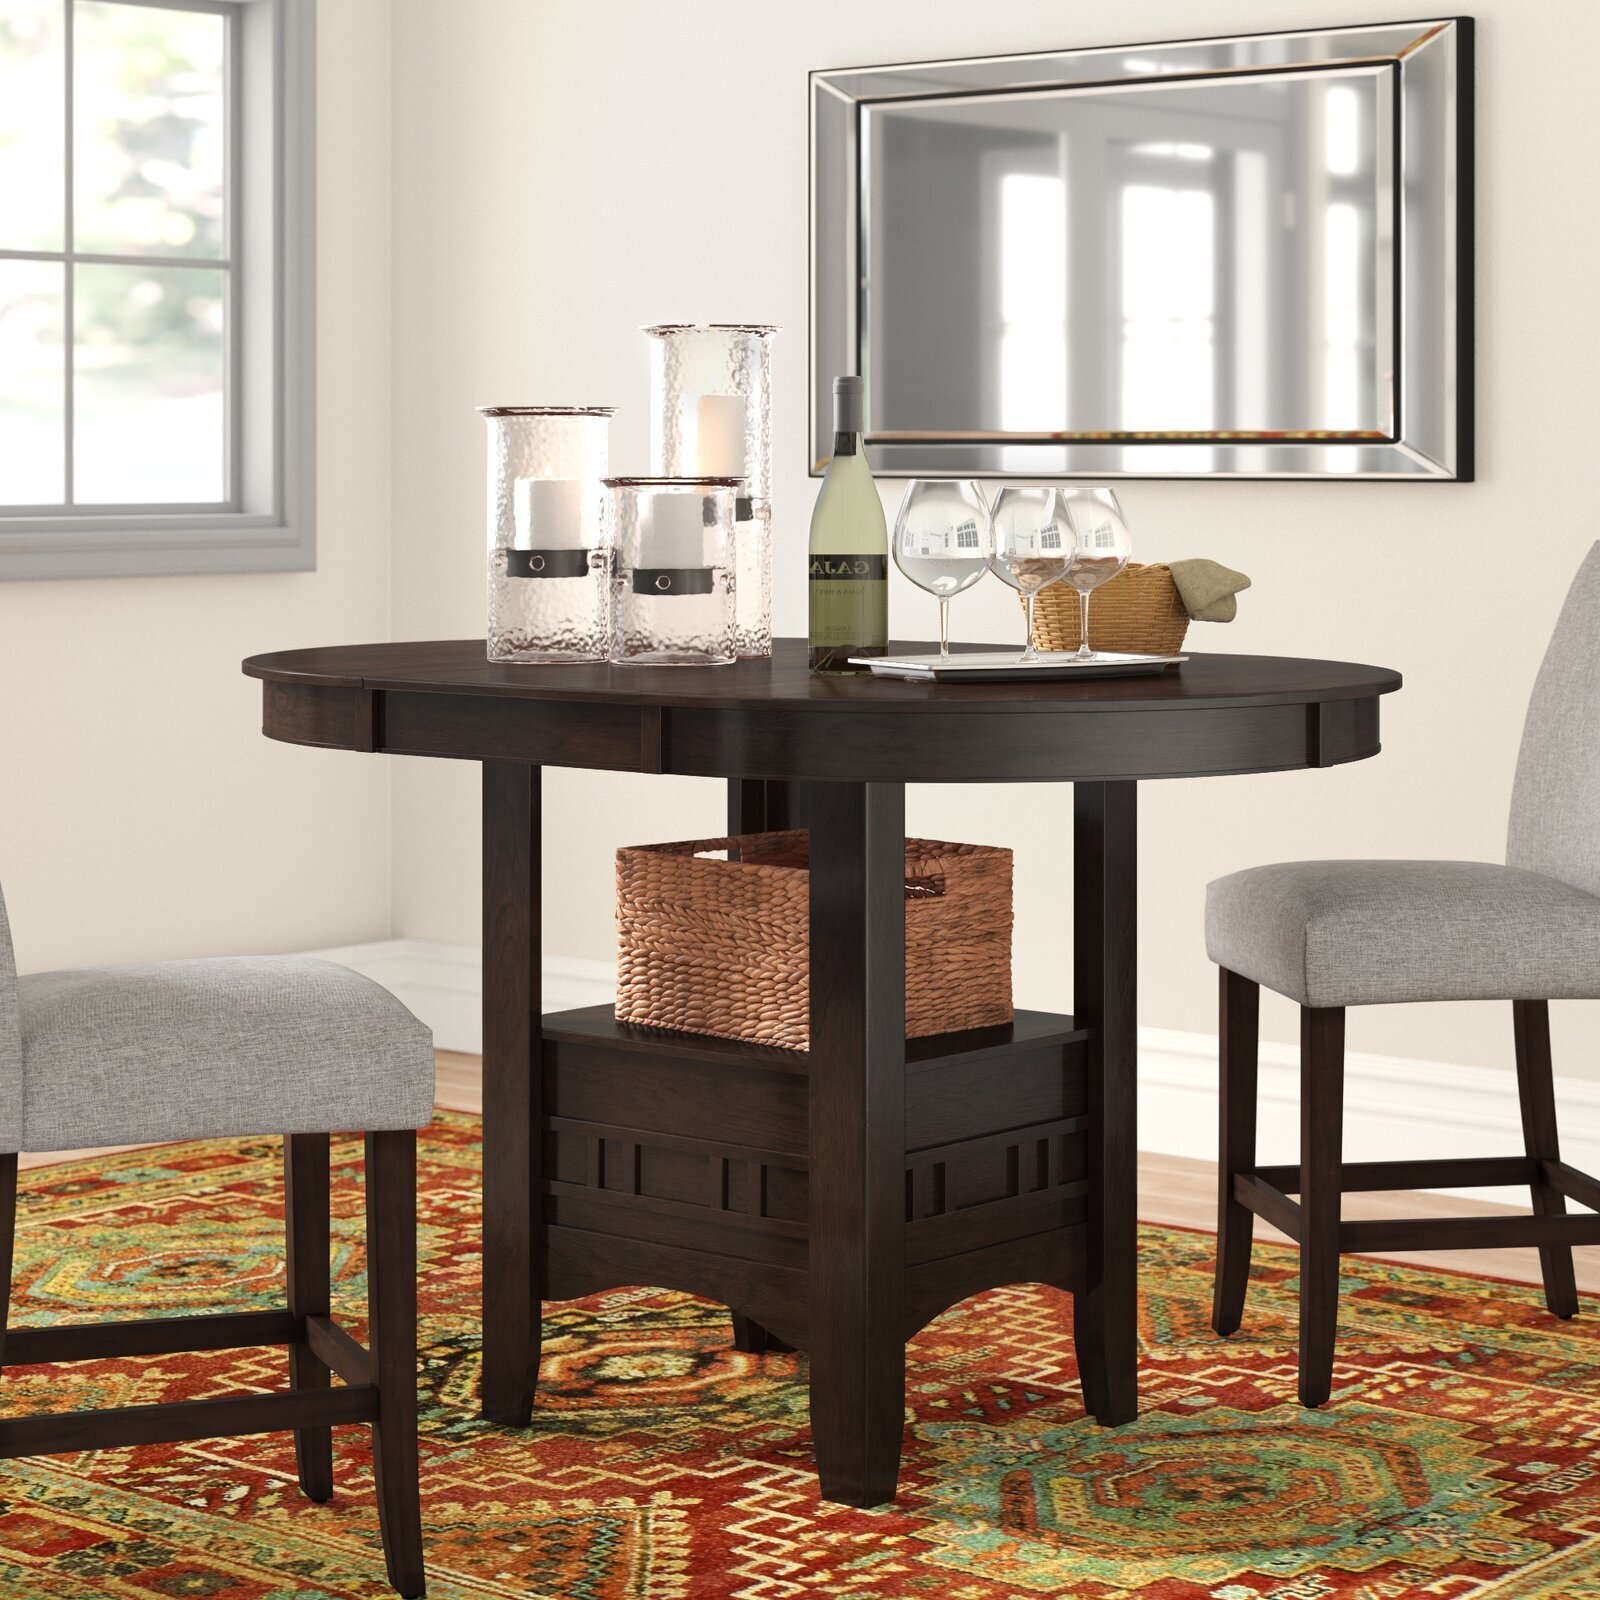 Drop leaf counter dining table for traditional homes